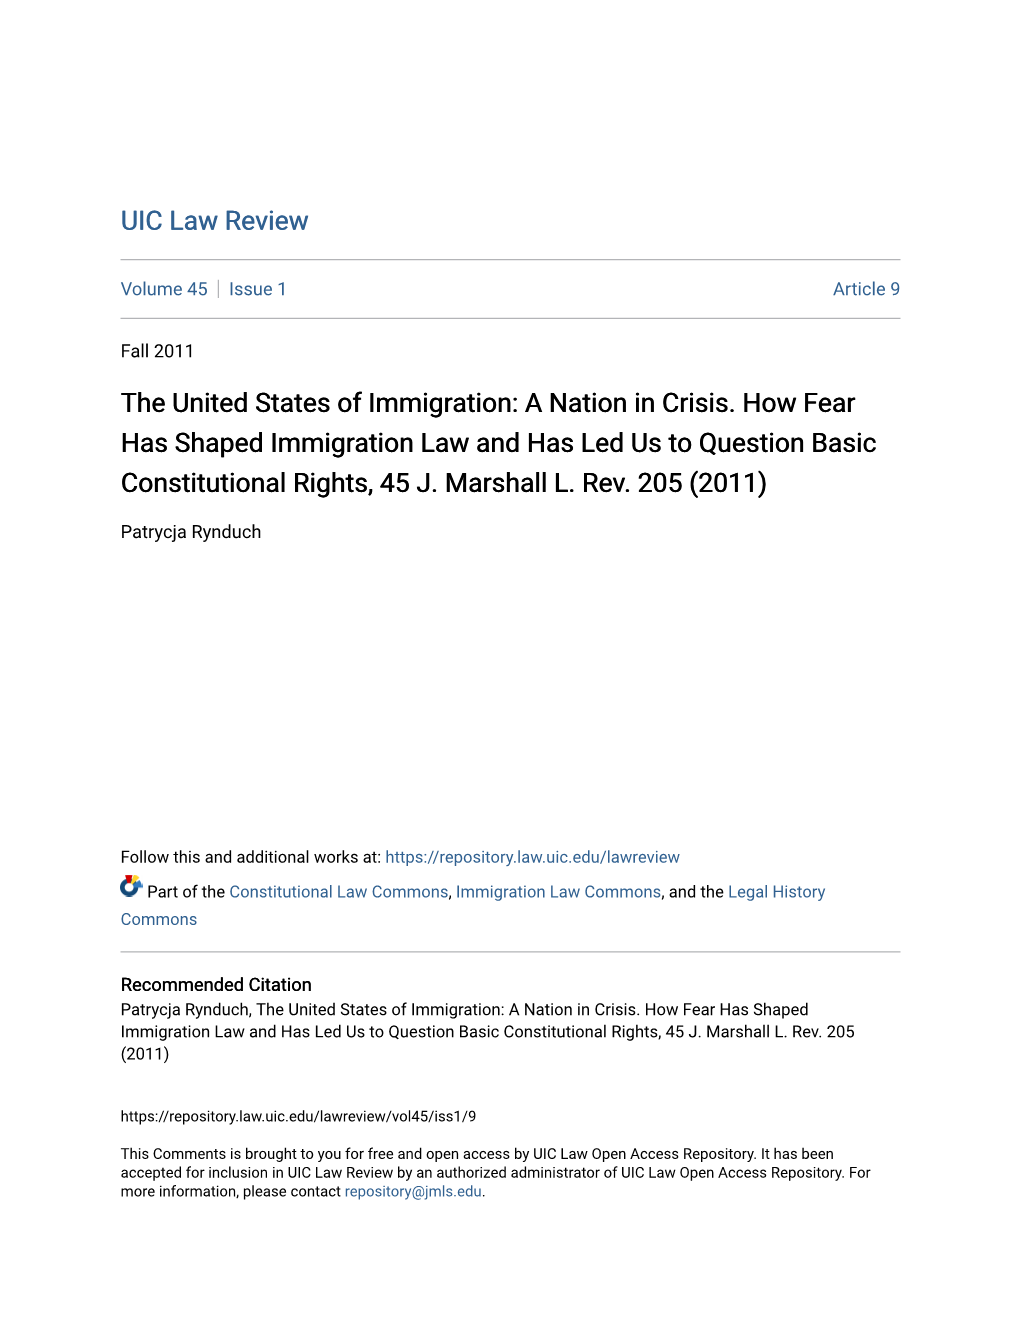 The United States of Immigration: a Nation in Crisis